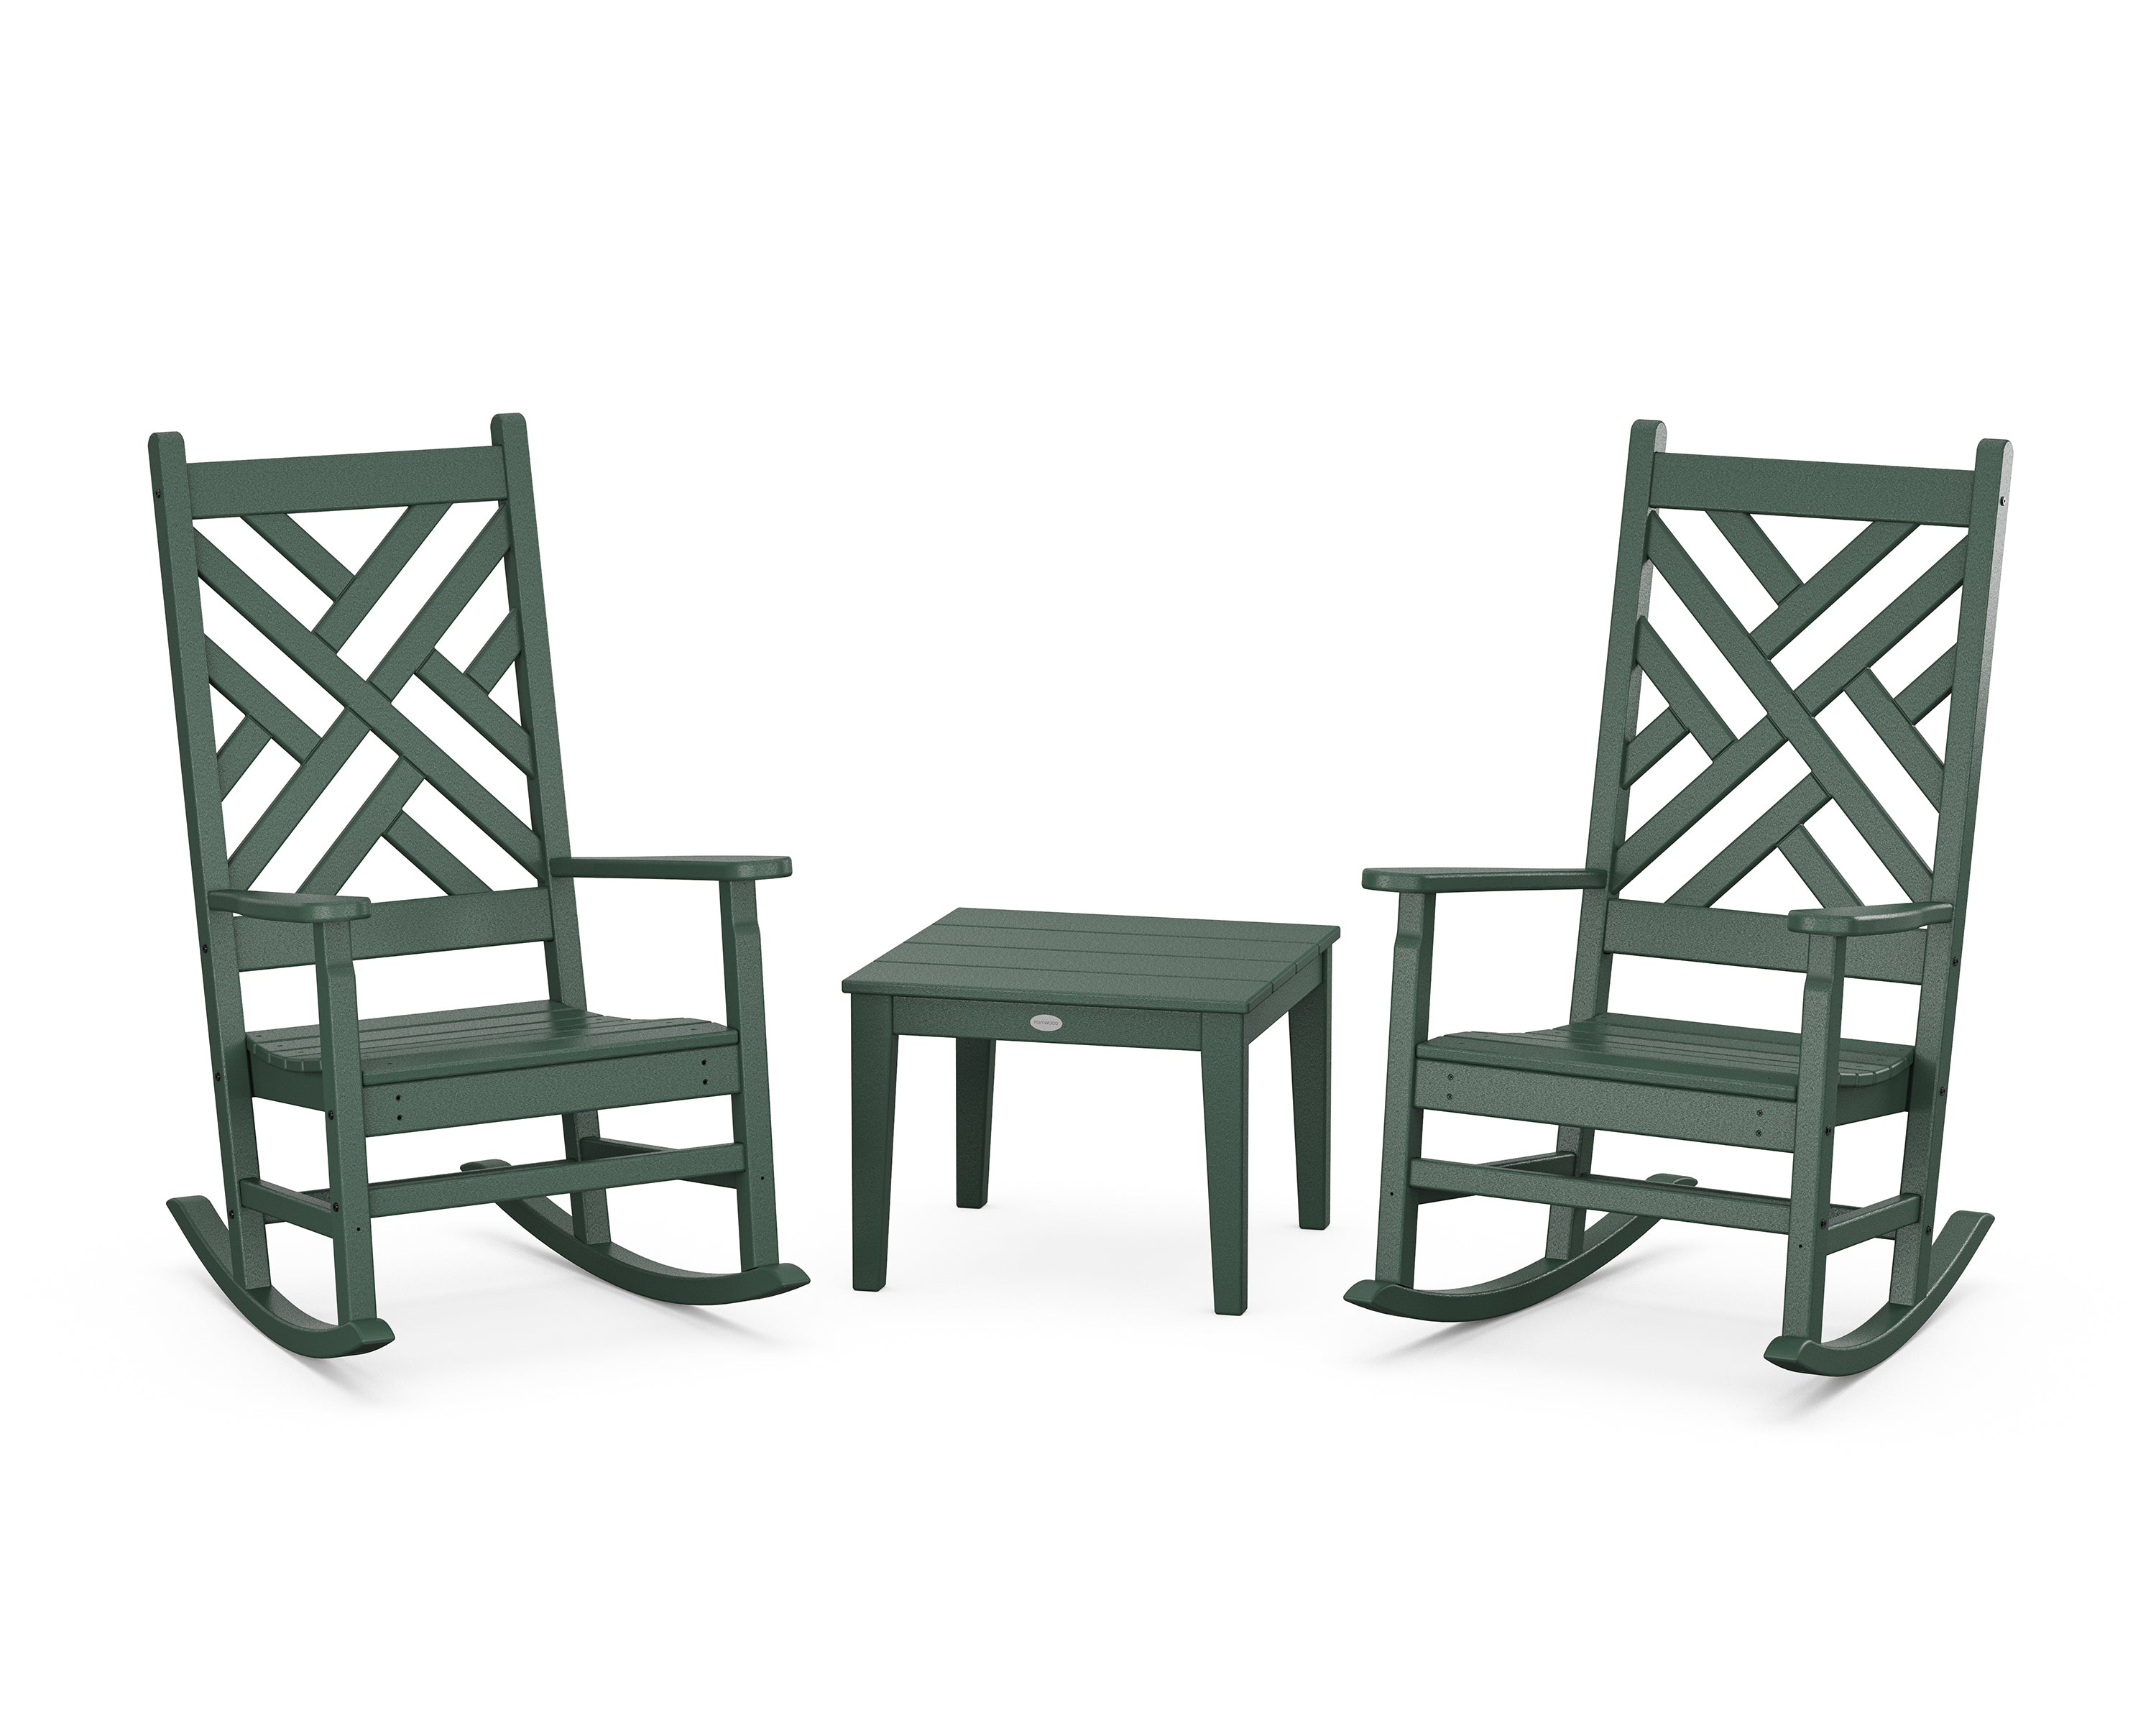 POLYWOOD® Chippendale 3-Piece Rocking Chair Set in Green